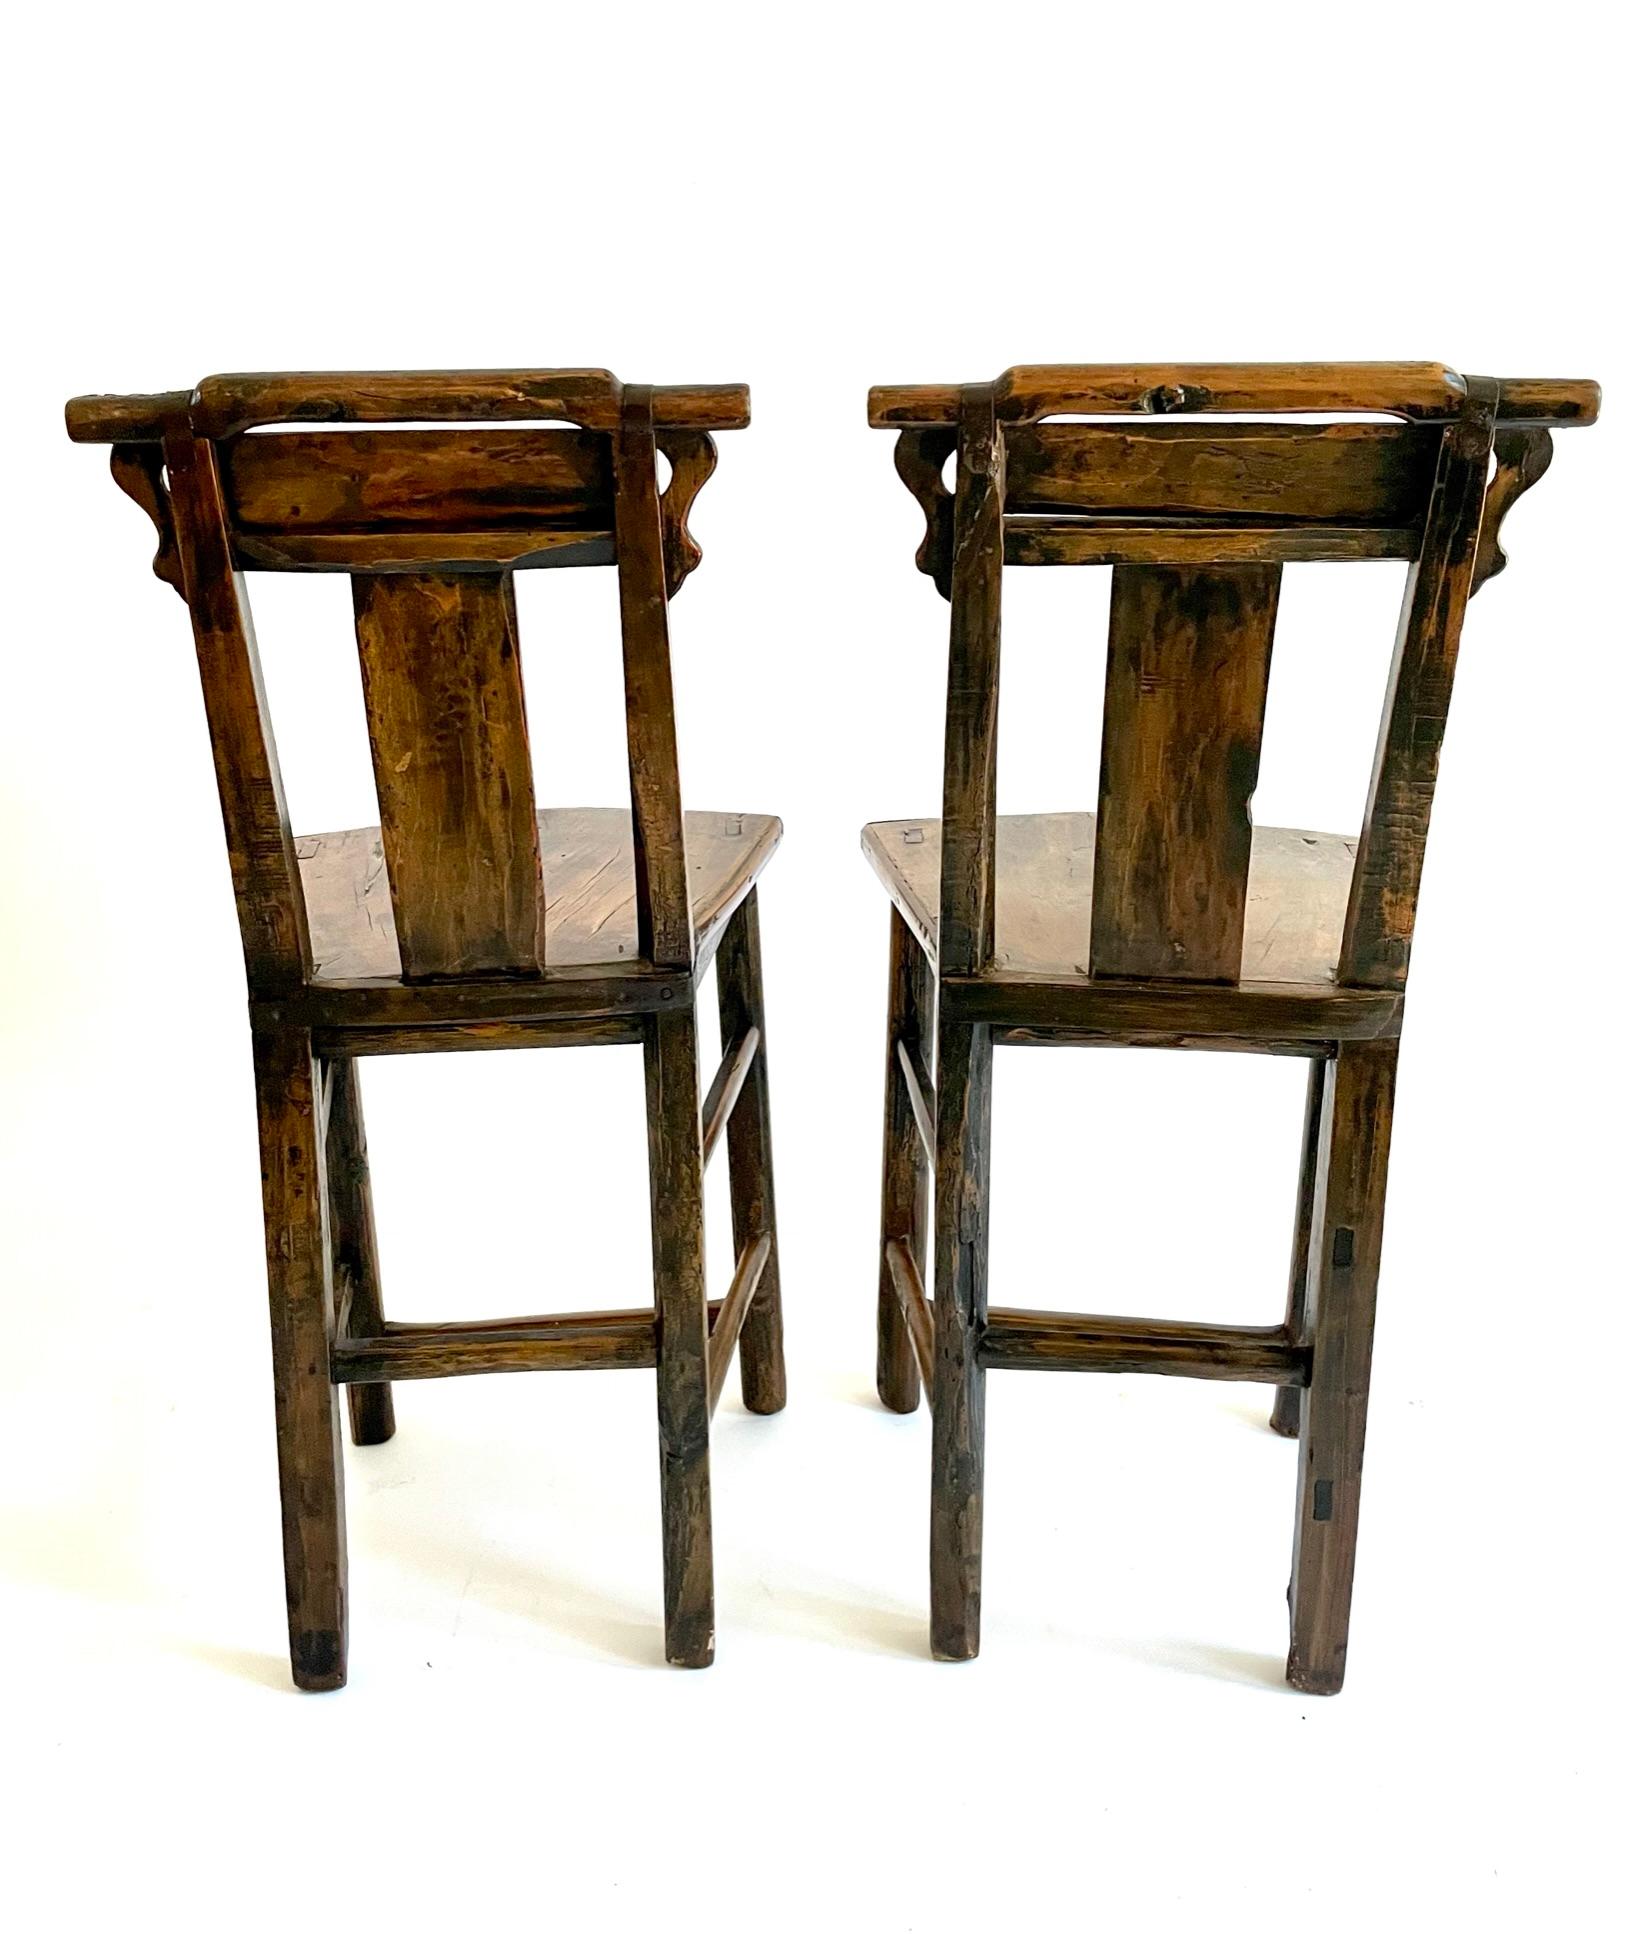 Pair of Painted Late 18th Century Chinese Chairs For Sale 13